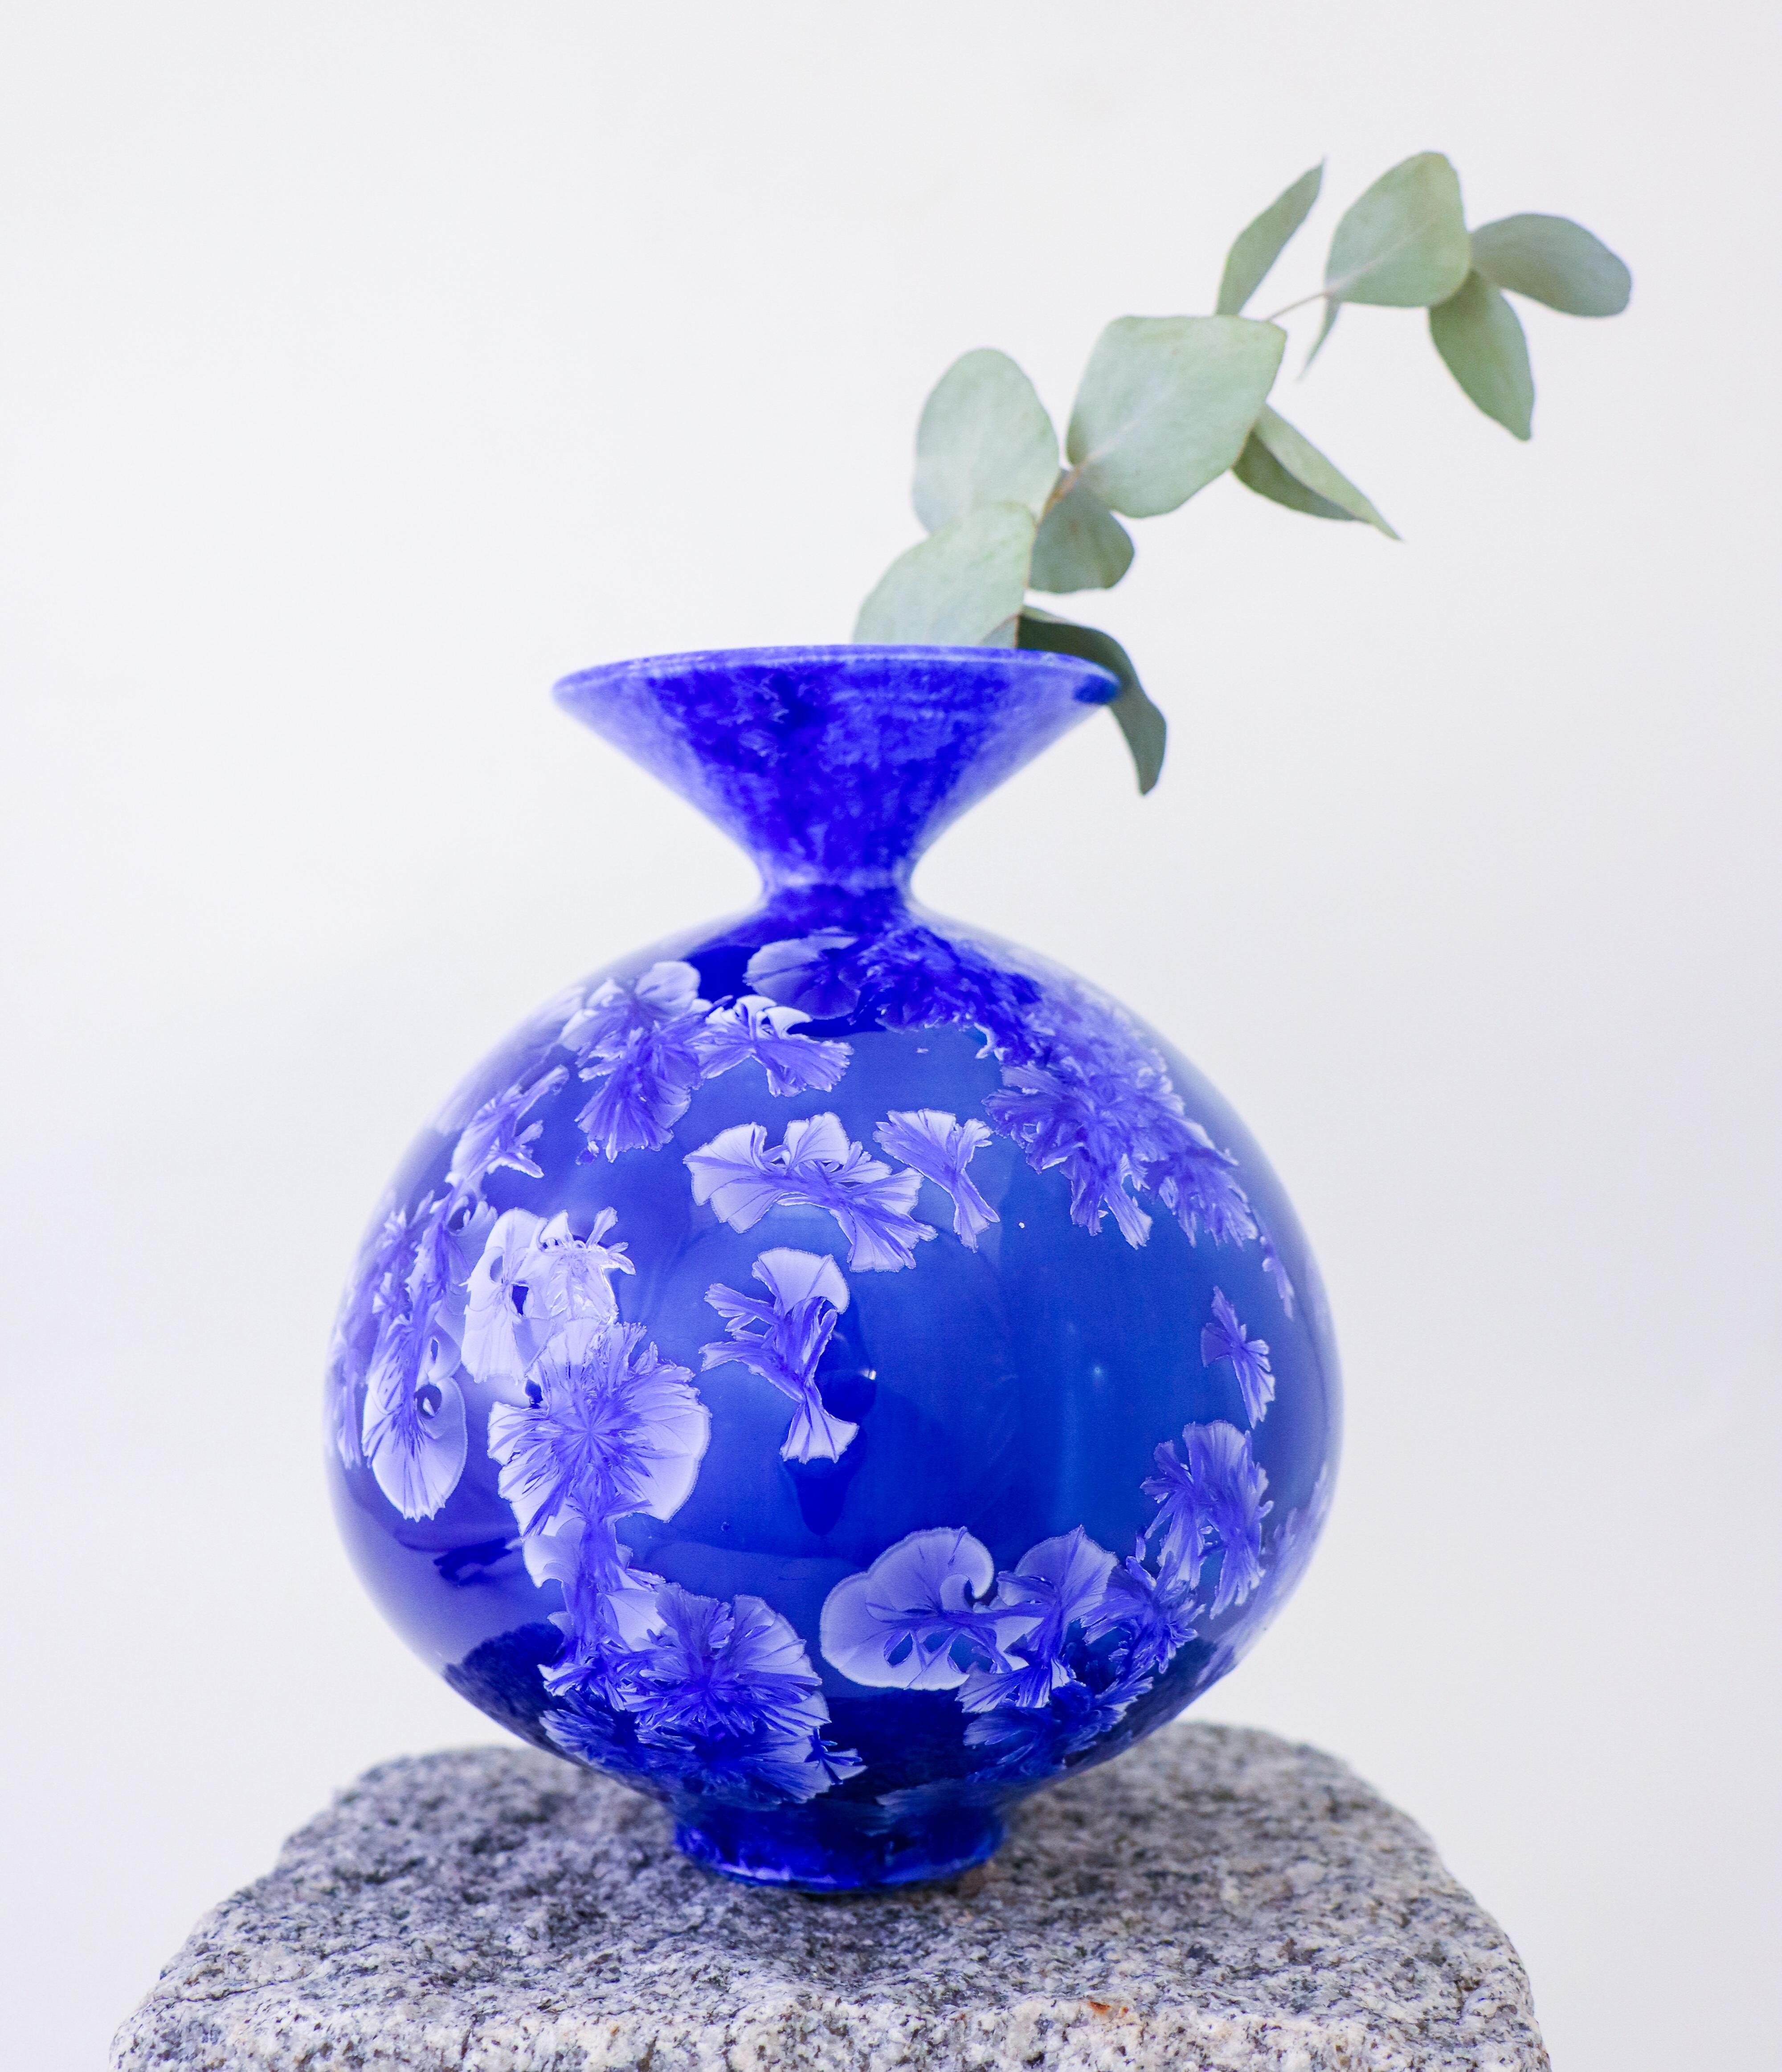 A blue vase with a stunning crystalline glaze designed by Isak Isaksson in Sweden. The vase is 17.5 cm (7